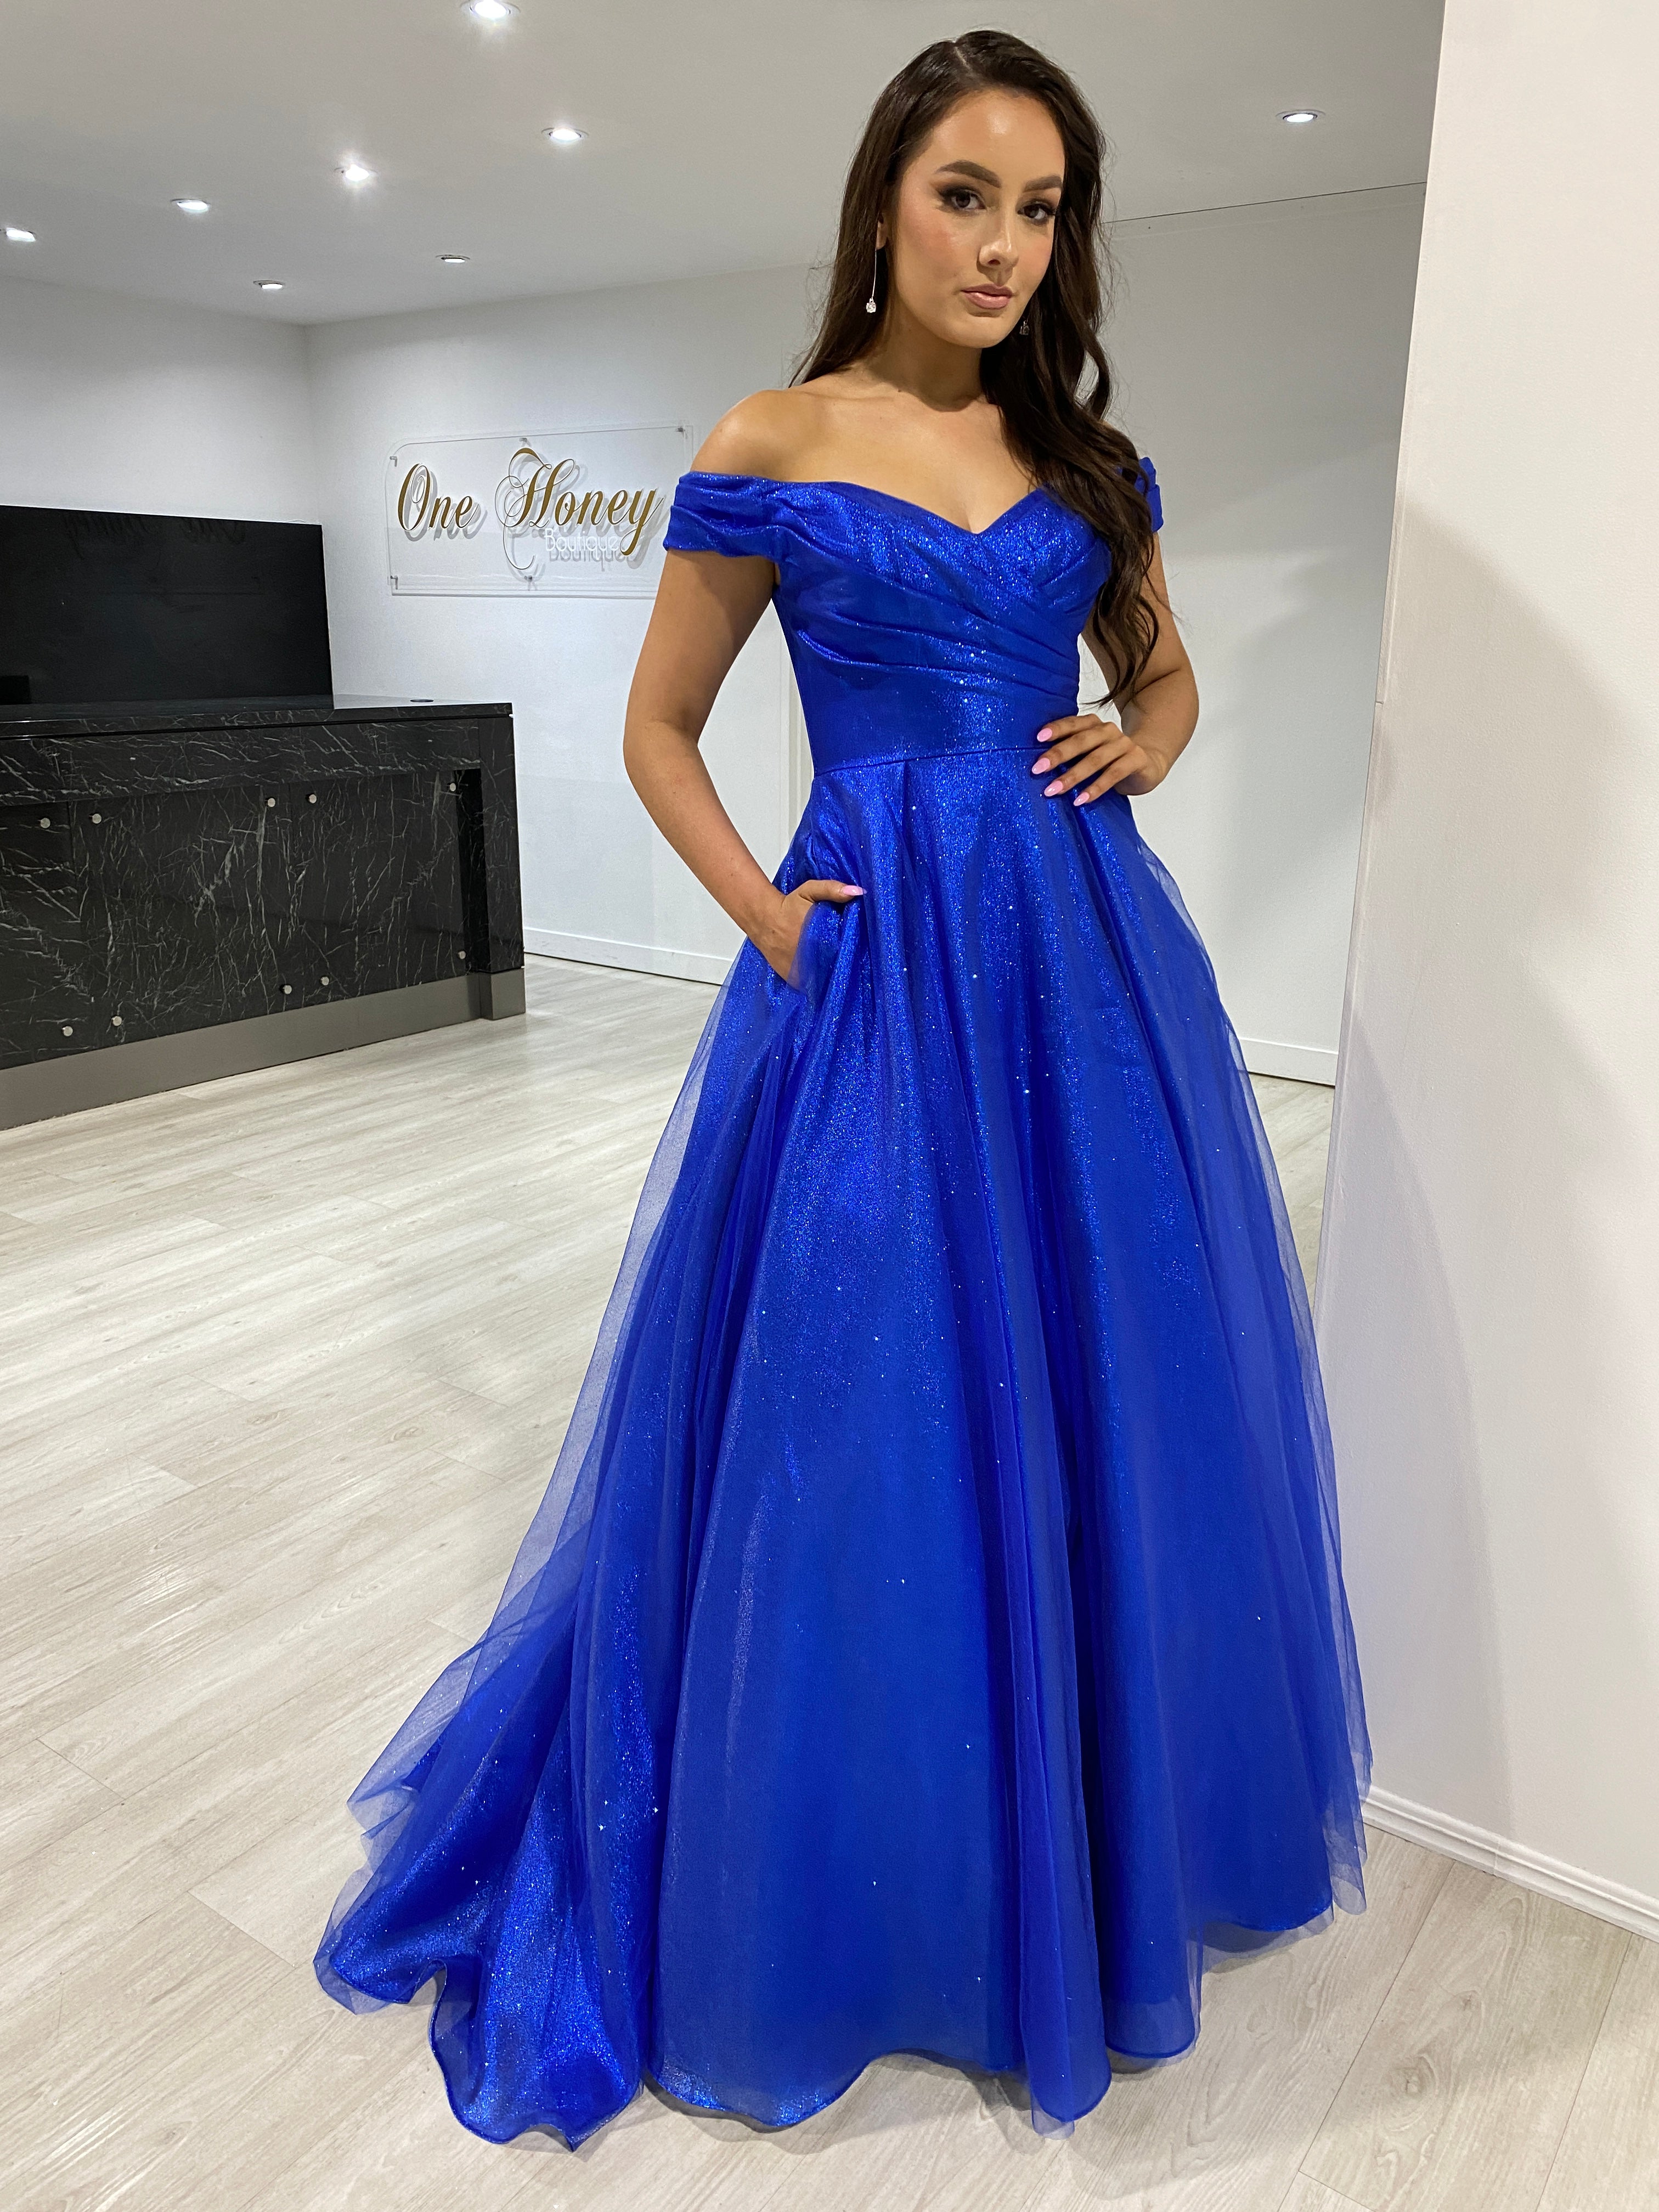 Clarisse Dress 8200 Steel Blue Shimmer Gown | Prom 2020|